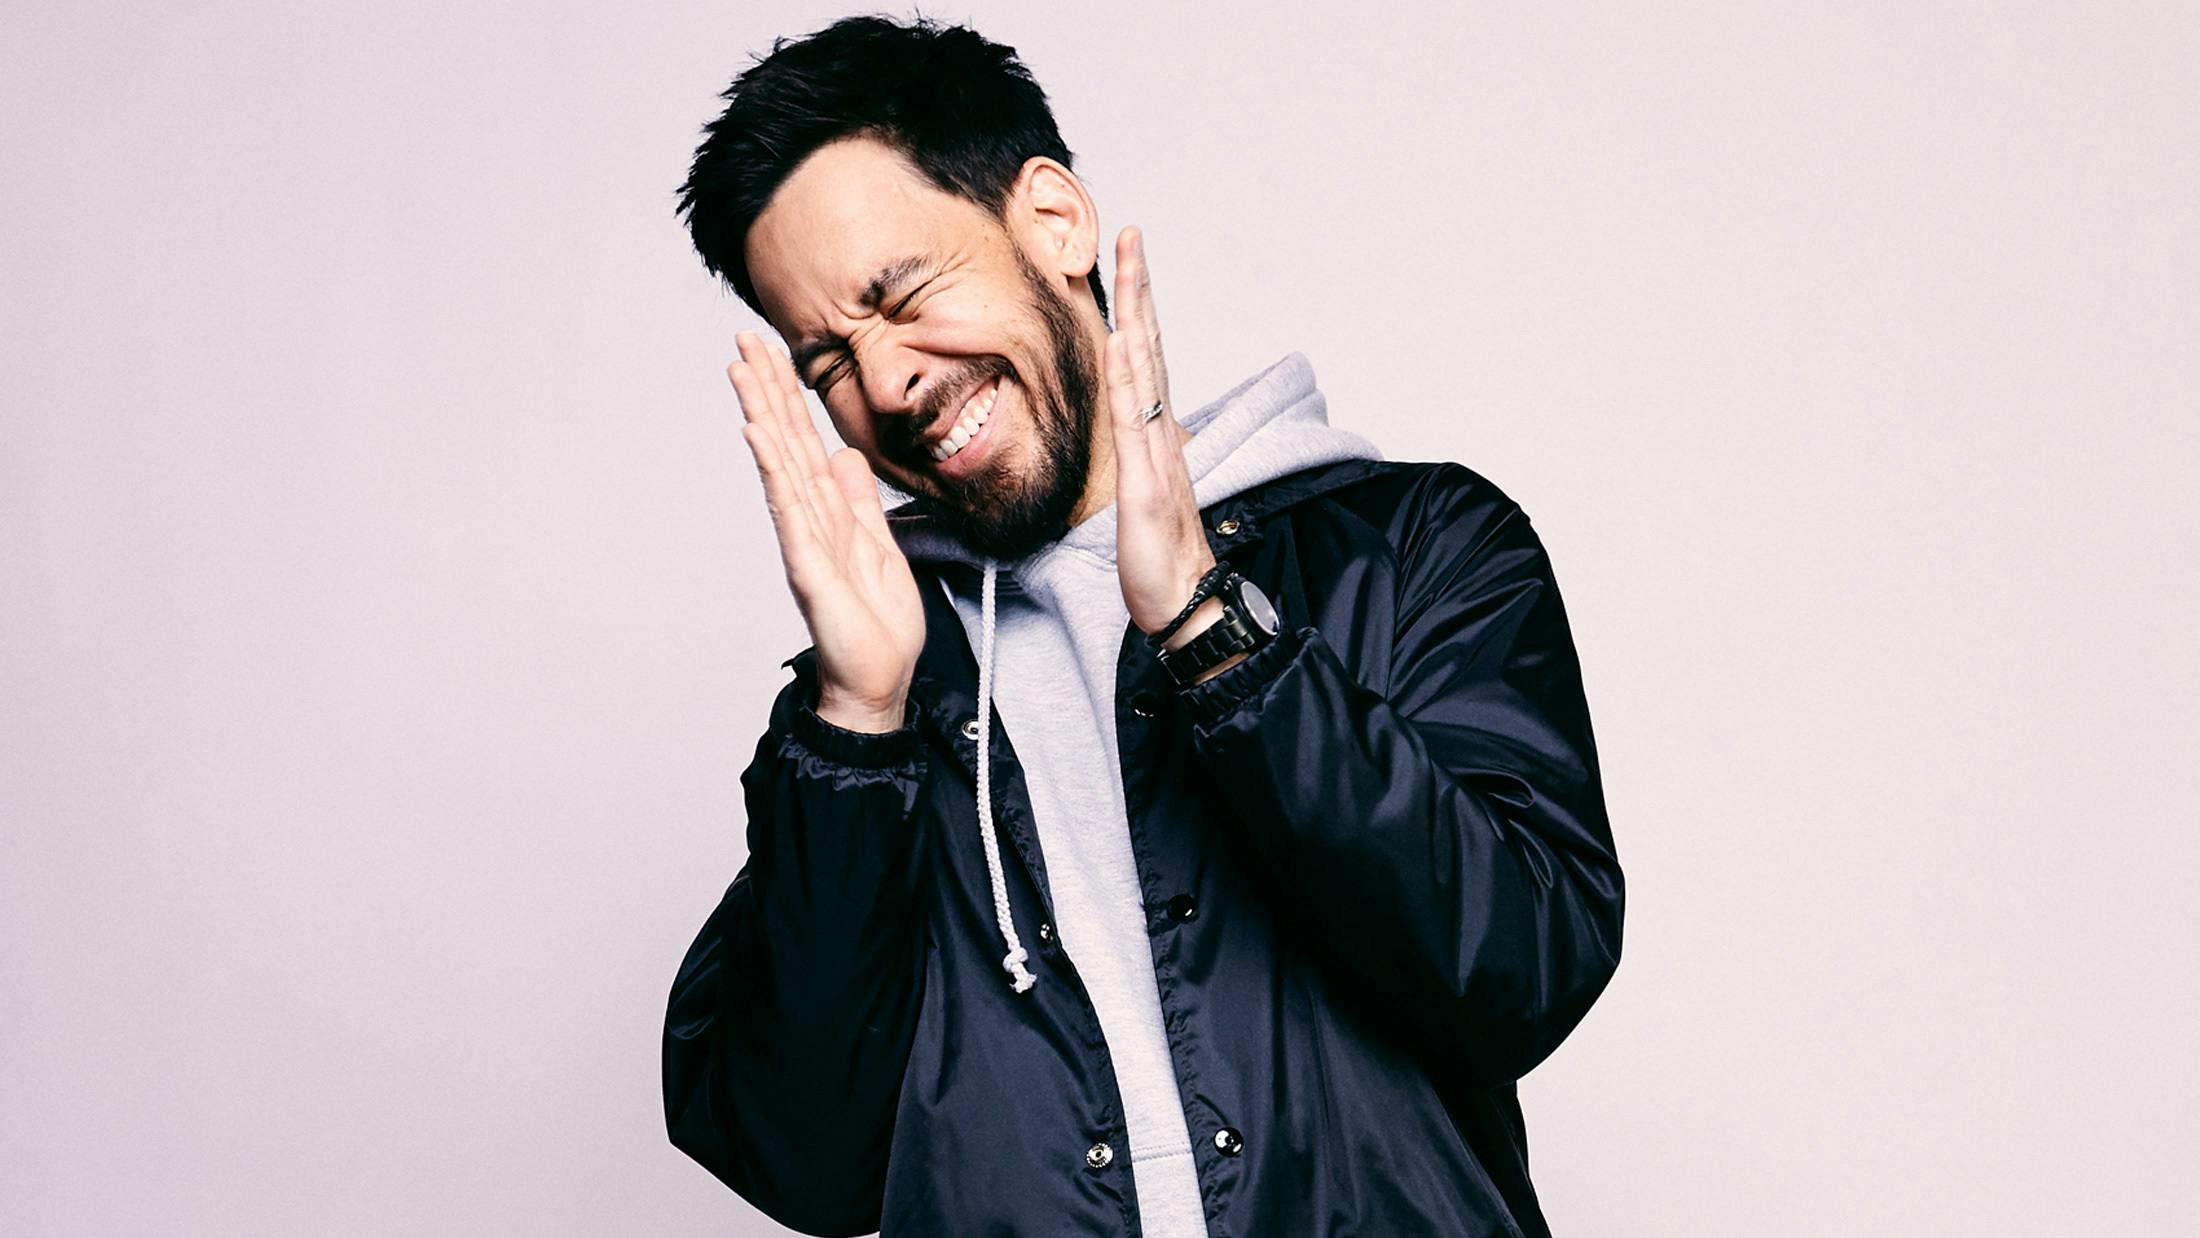 Mike Shinoda is releasing a new single this Friday